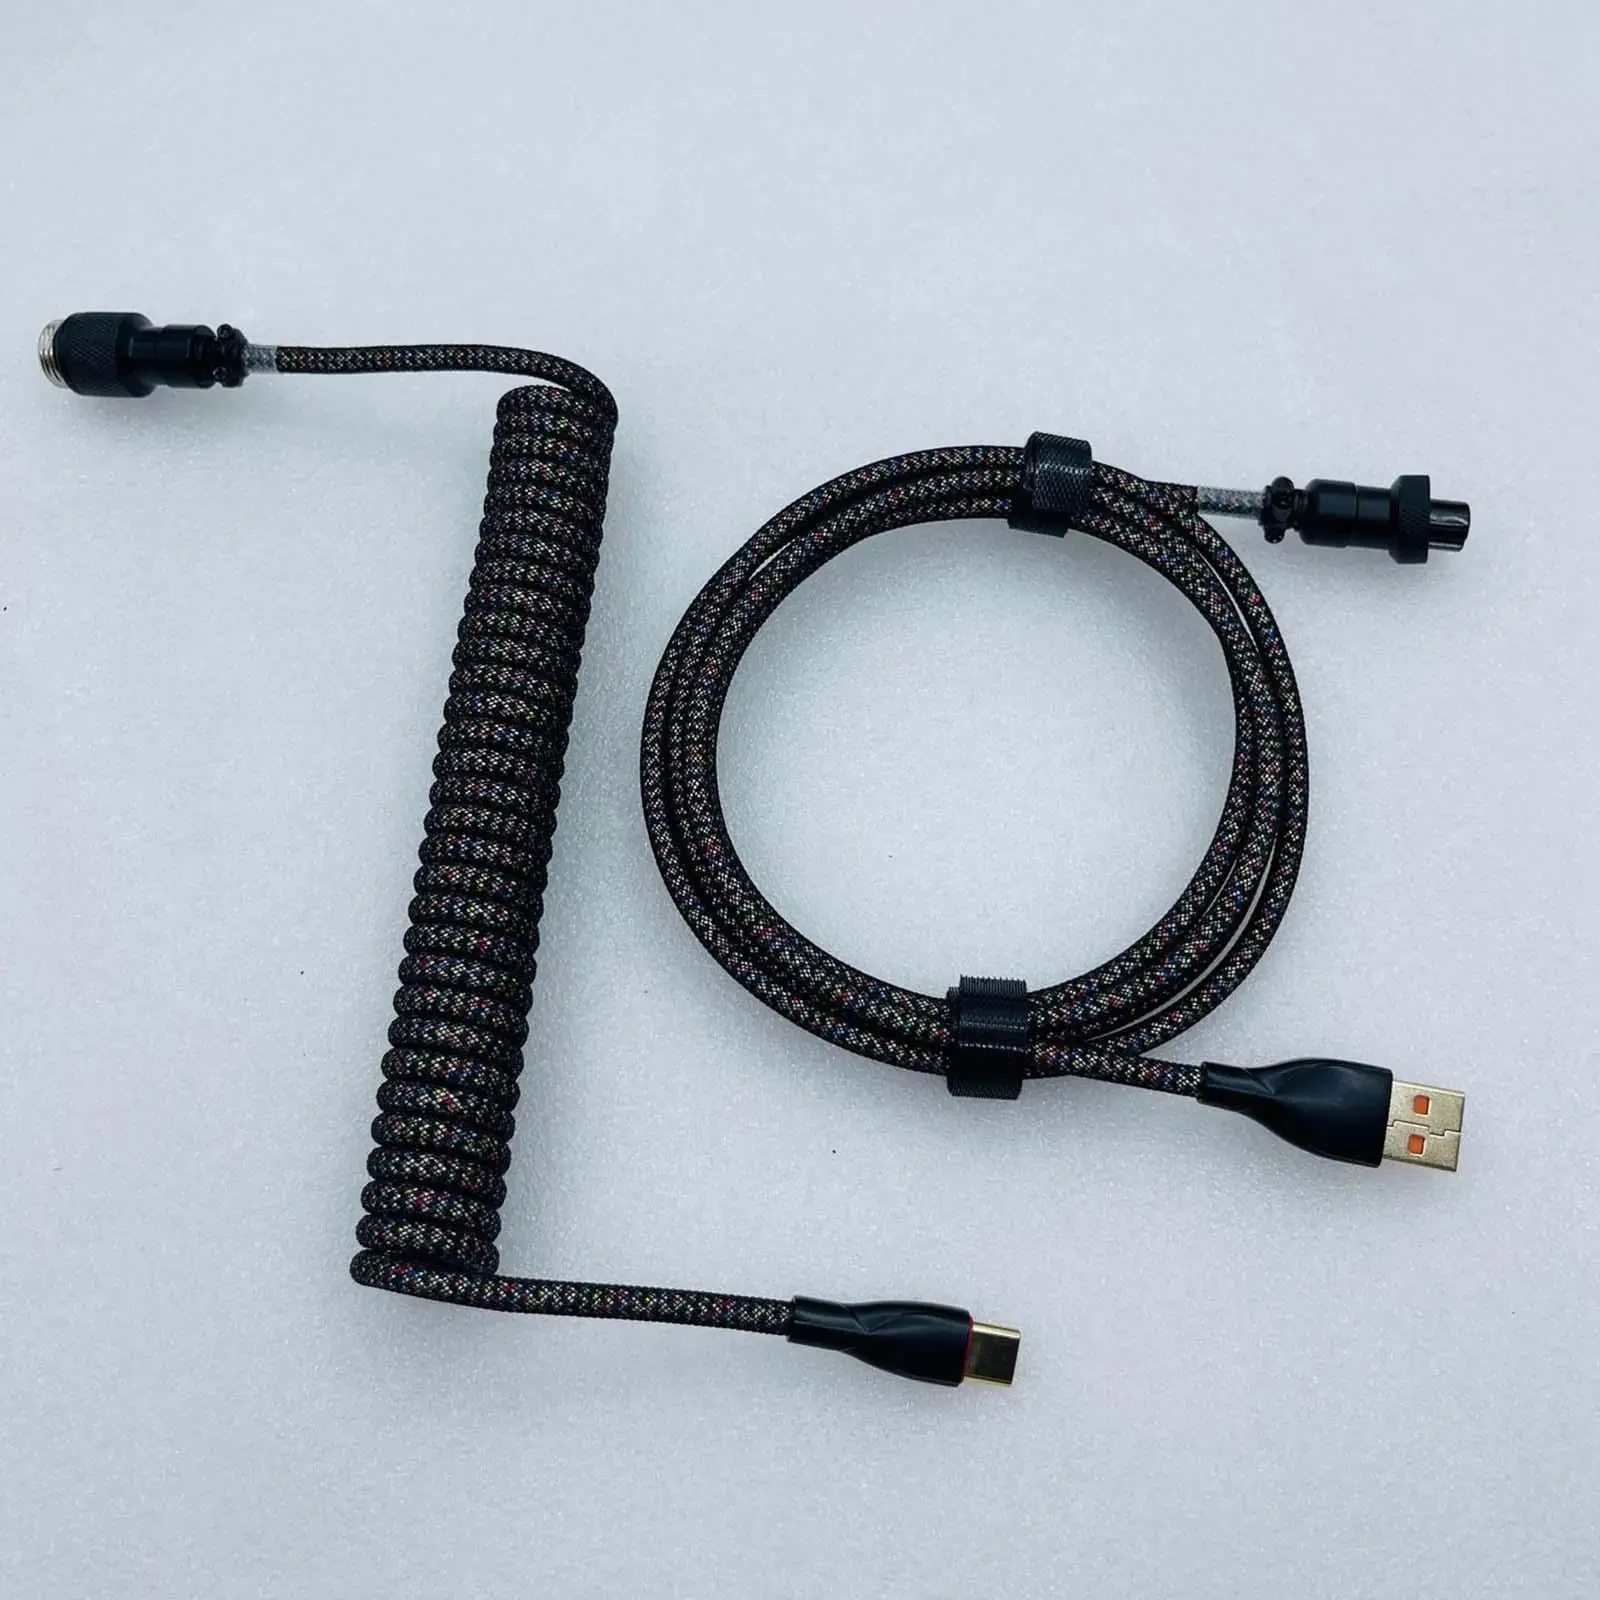 1.8M USB to Type C Coiled Cable Black Extendable Fast Charging Double Sleeved Metal DIY Split Cables for Mechanical Keyboard